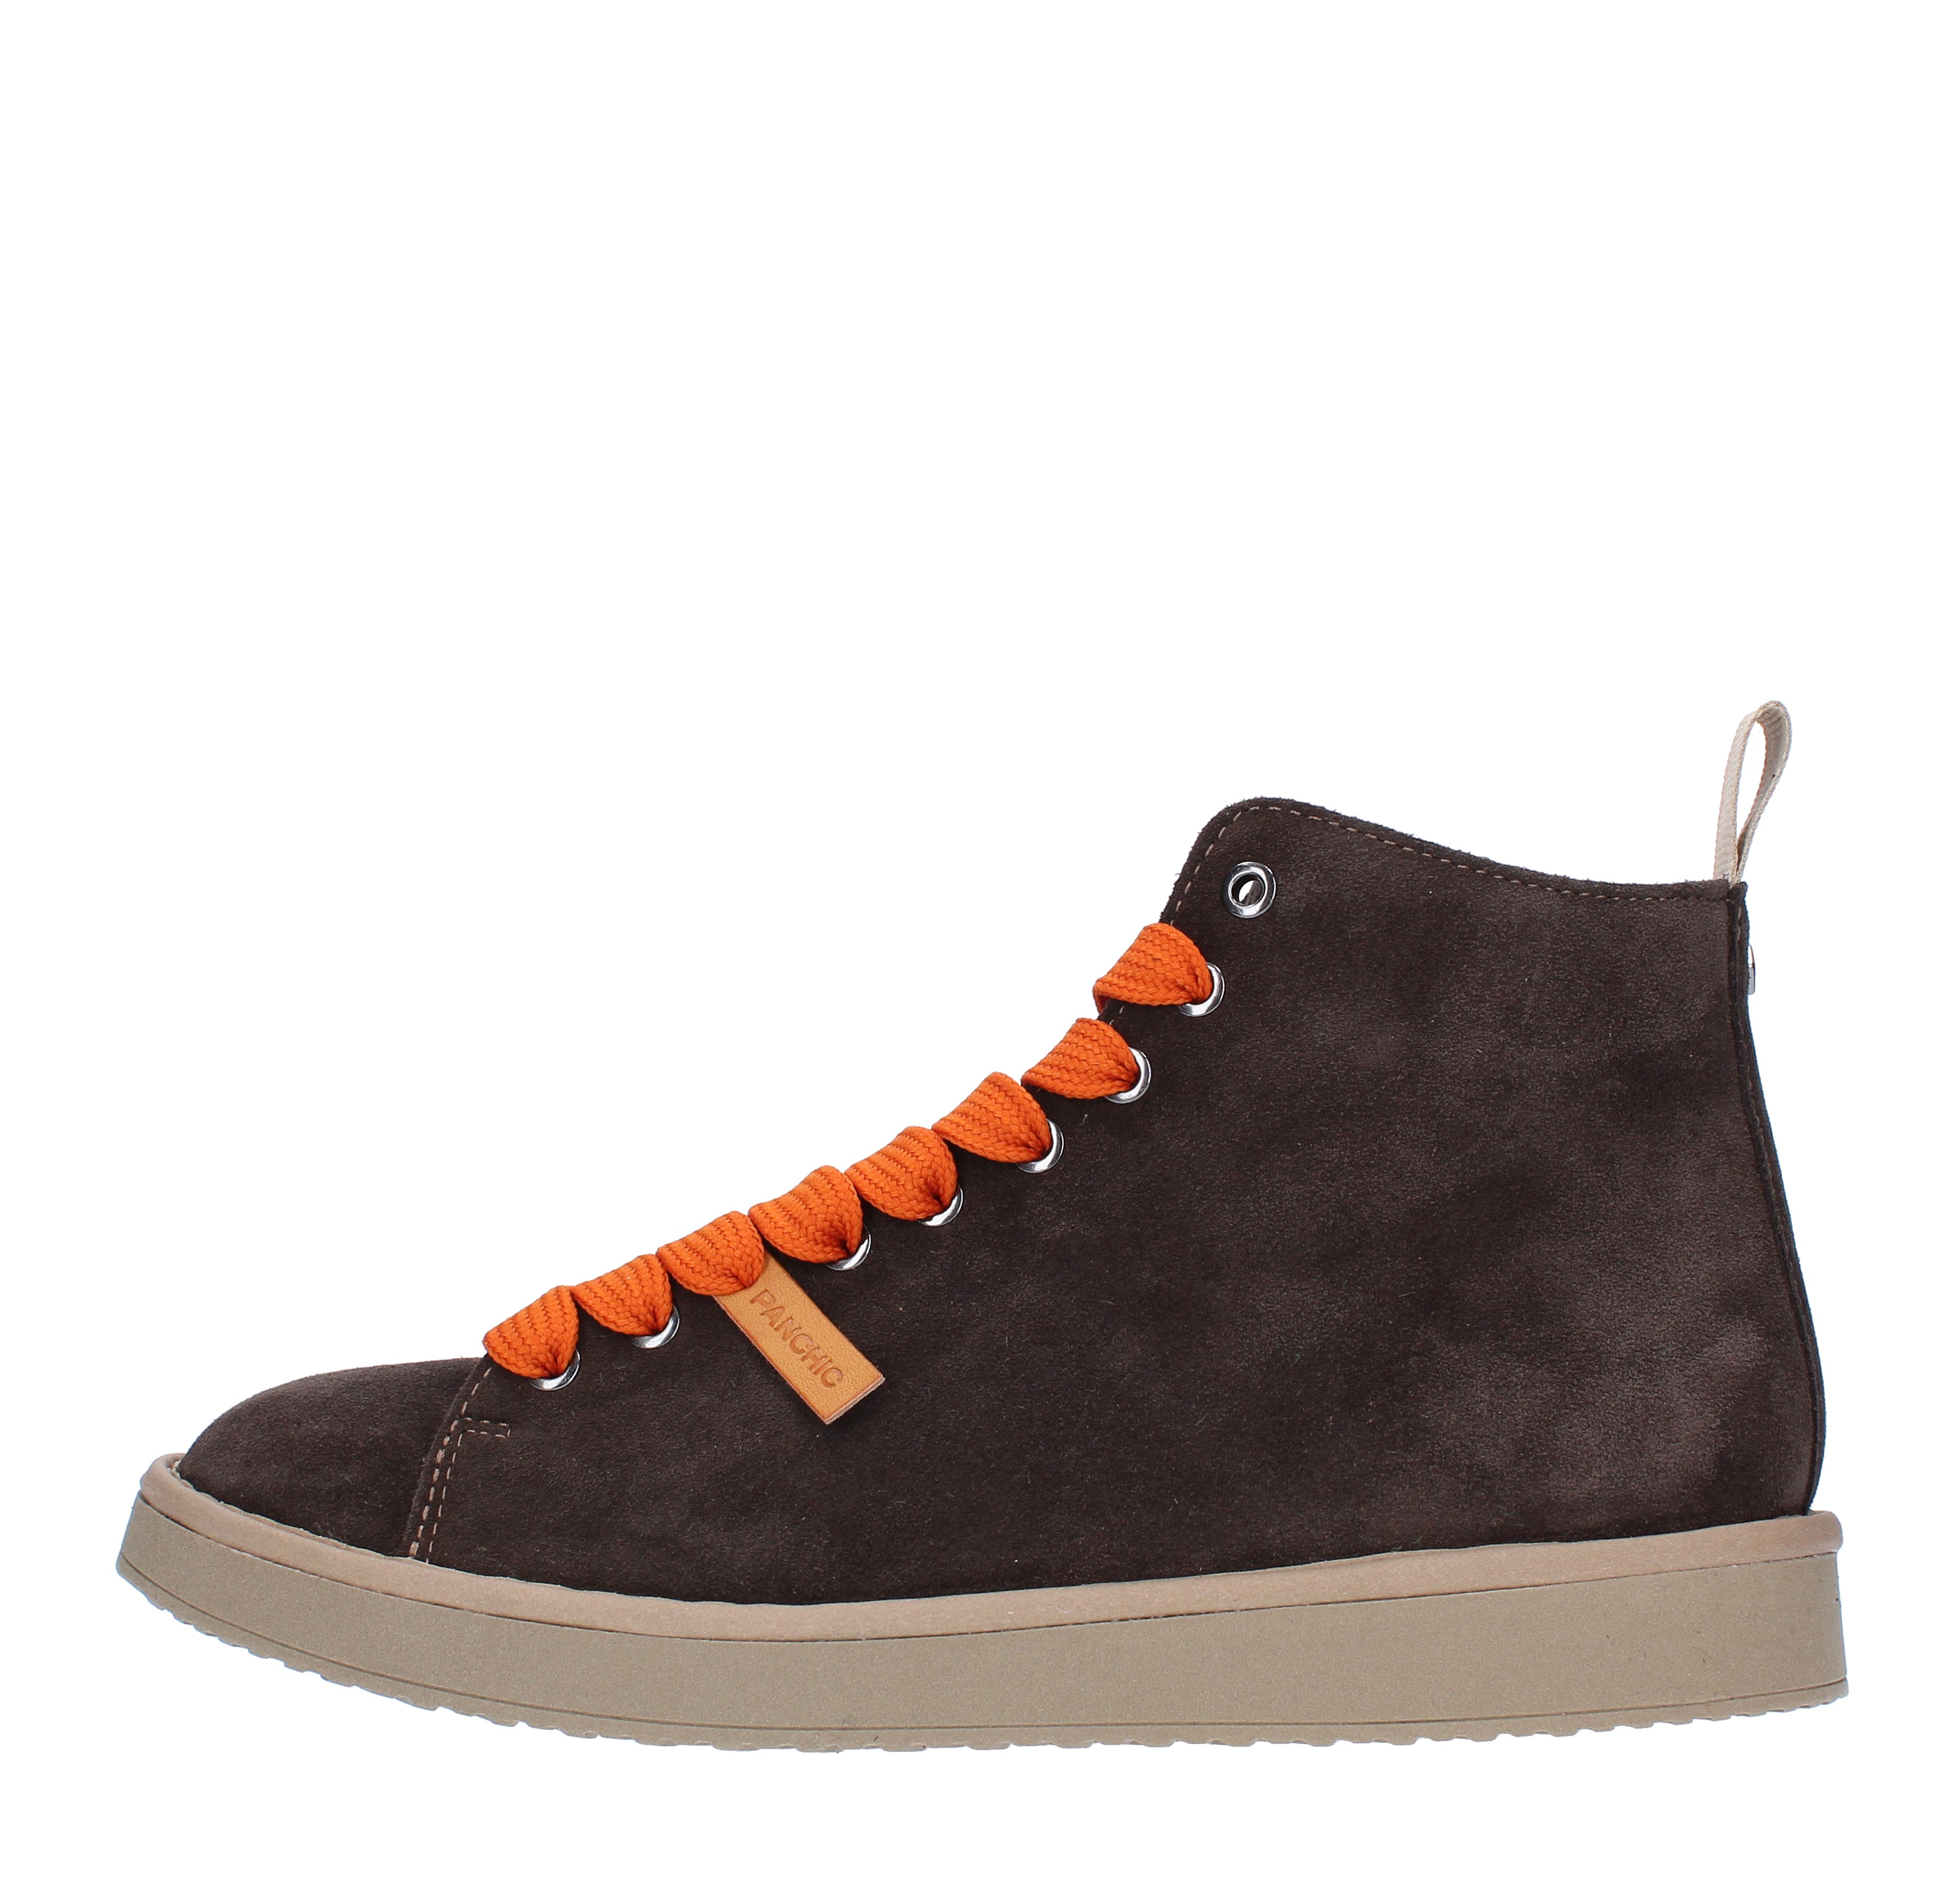 Sneakers alte P01 ANKLE BOOT PANCHIC in camoscio - PANCHIC - Ginevra  calzature